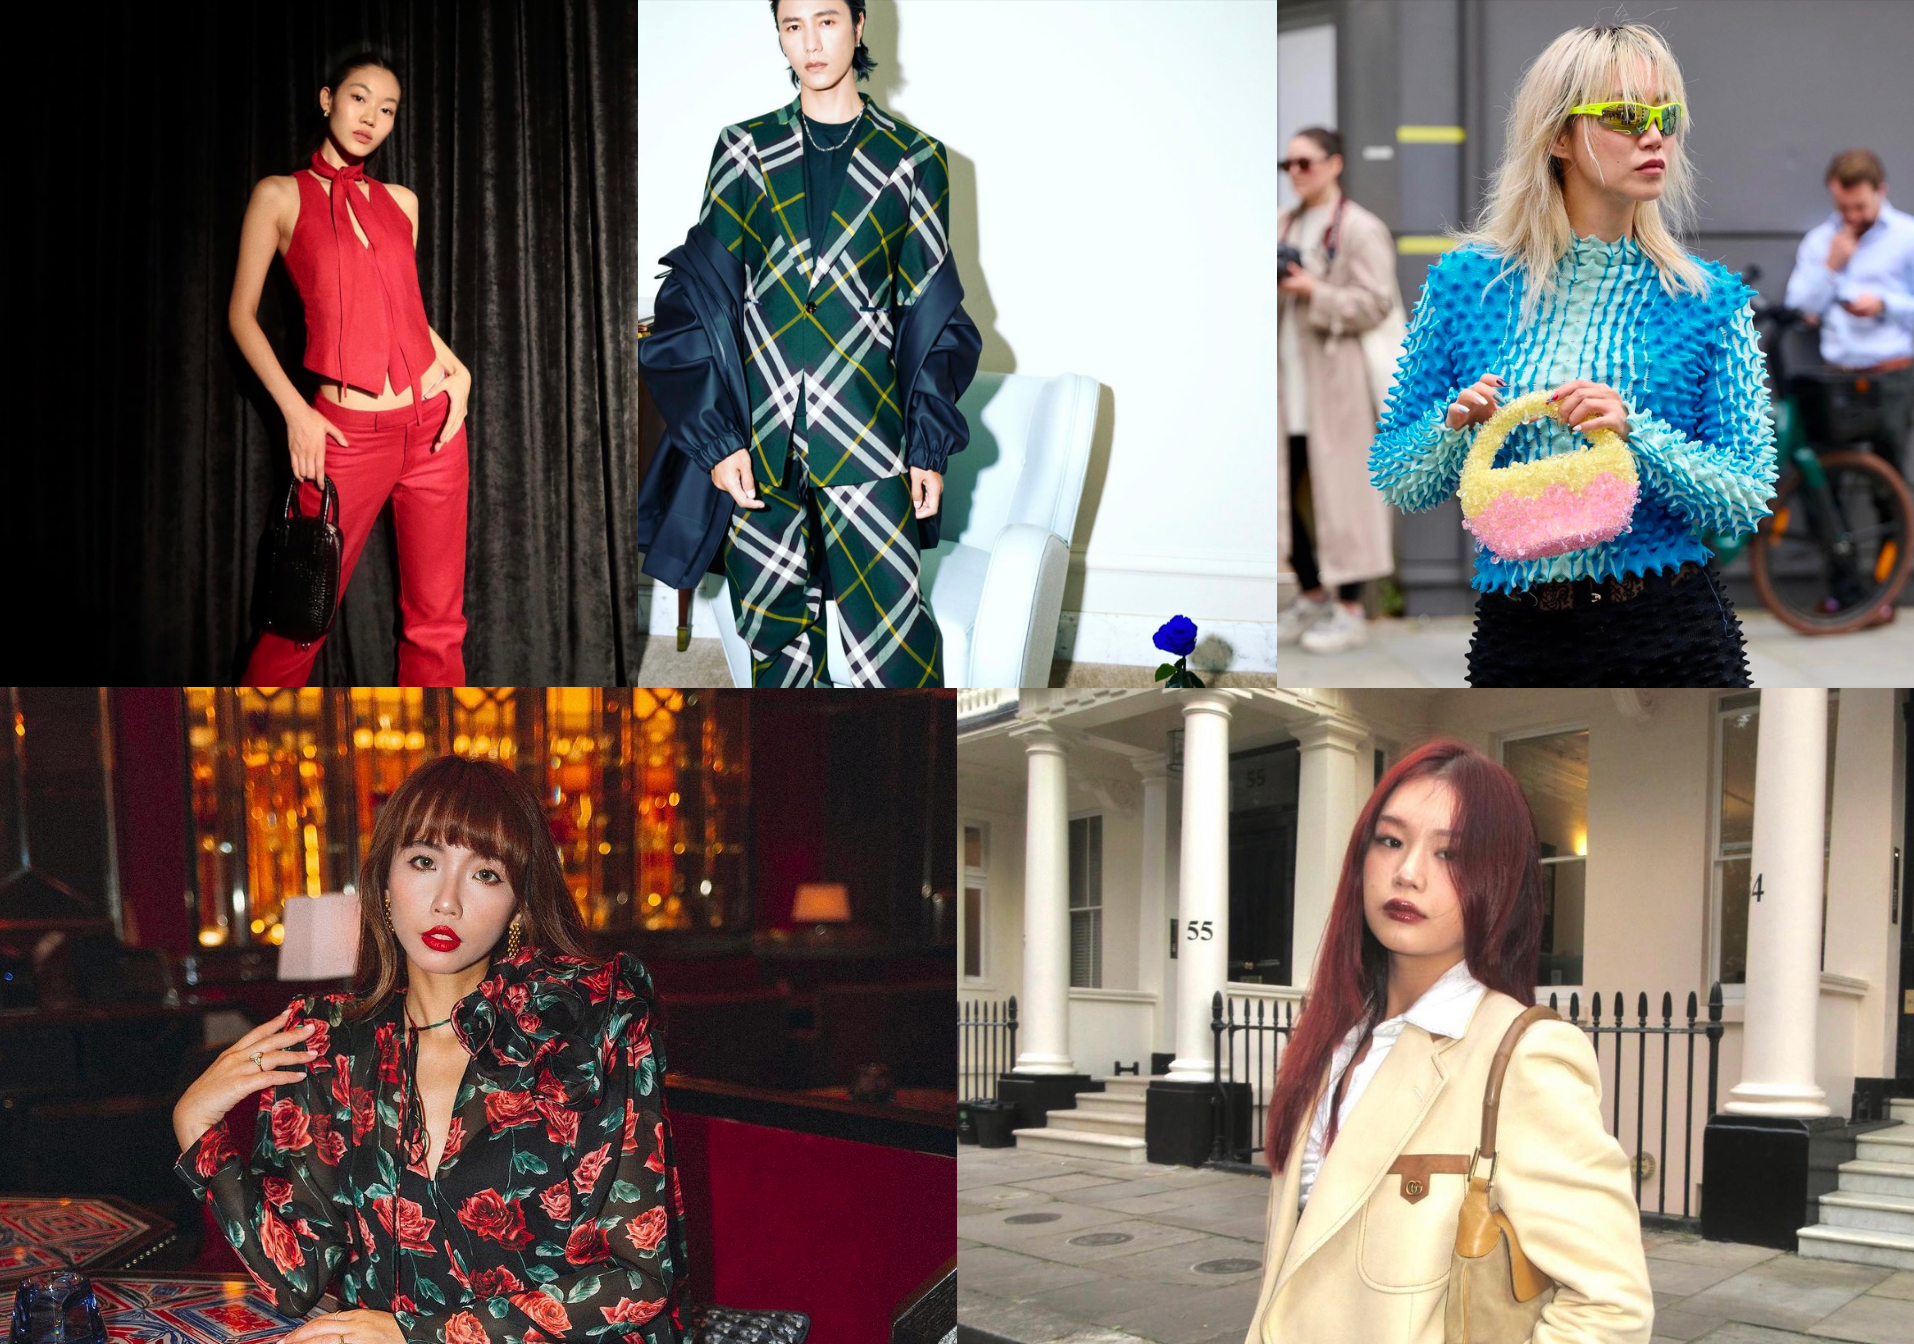 This edition of ‘Jing Daily’s’ new KOL Tracker breaks down Chinese KOLs’ attendance at London Fashion Week. Was their presence enough to spark conversation in China? Photo: Jing Daily